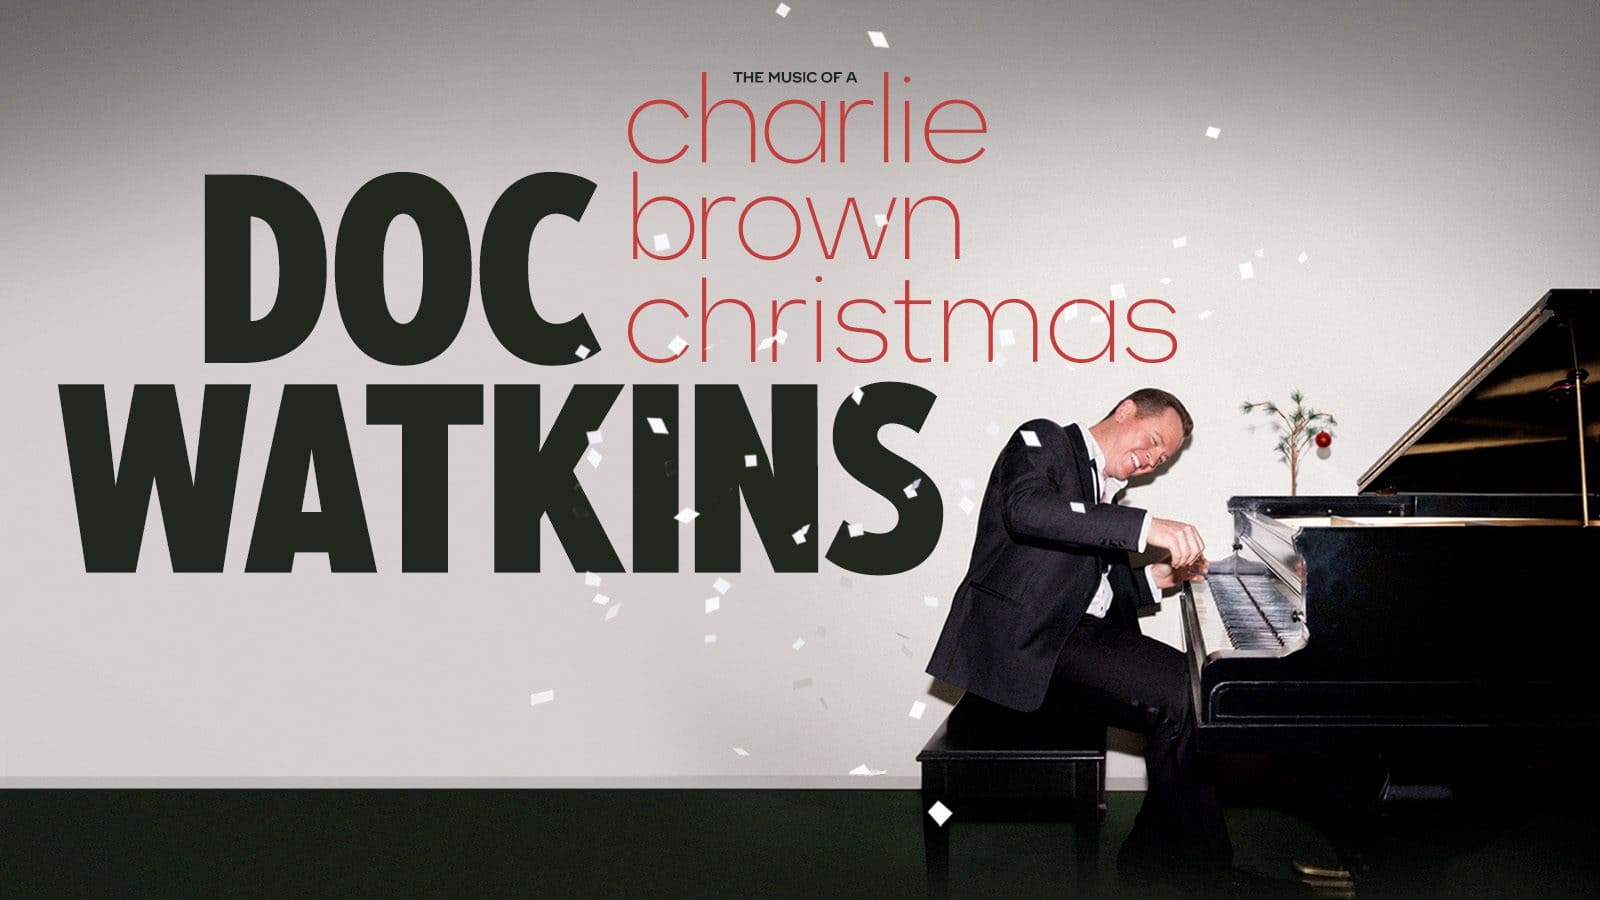 You are currently viewing Doc Watkins Presents The Music of a Charlie Brown Christmas at the Tobin Center